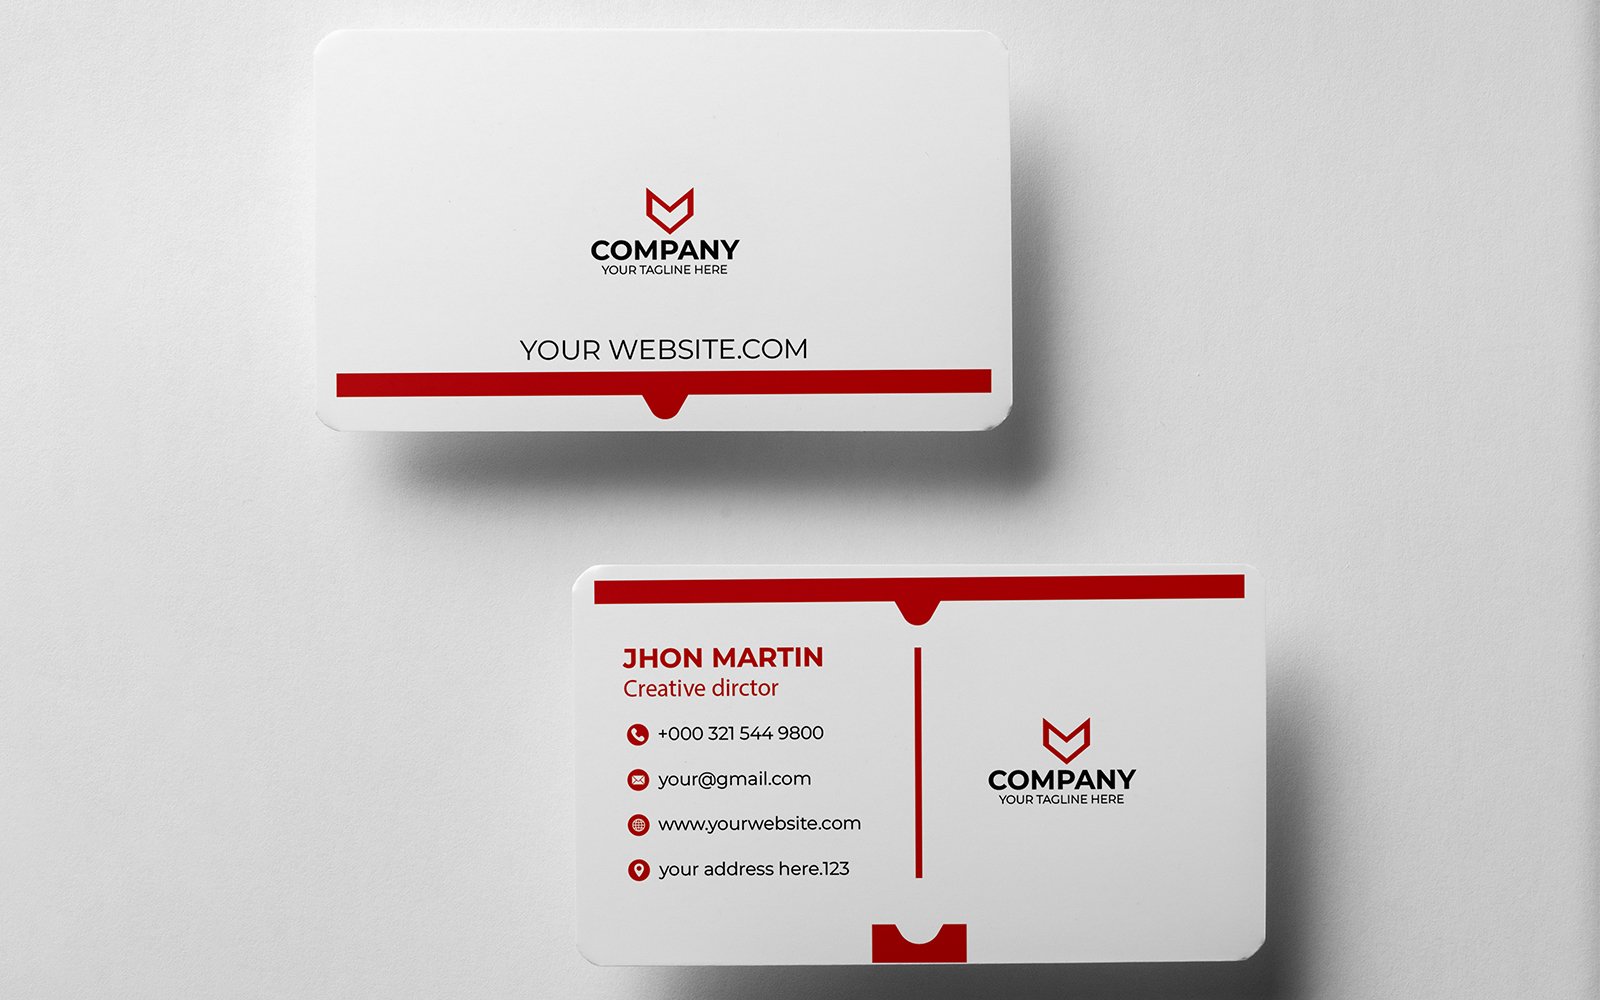 Template #349278 Card Company Webdesign Template - Logo template Preview